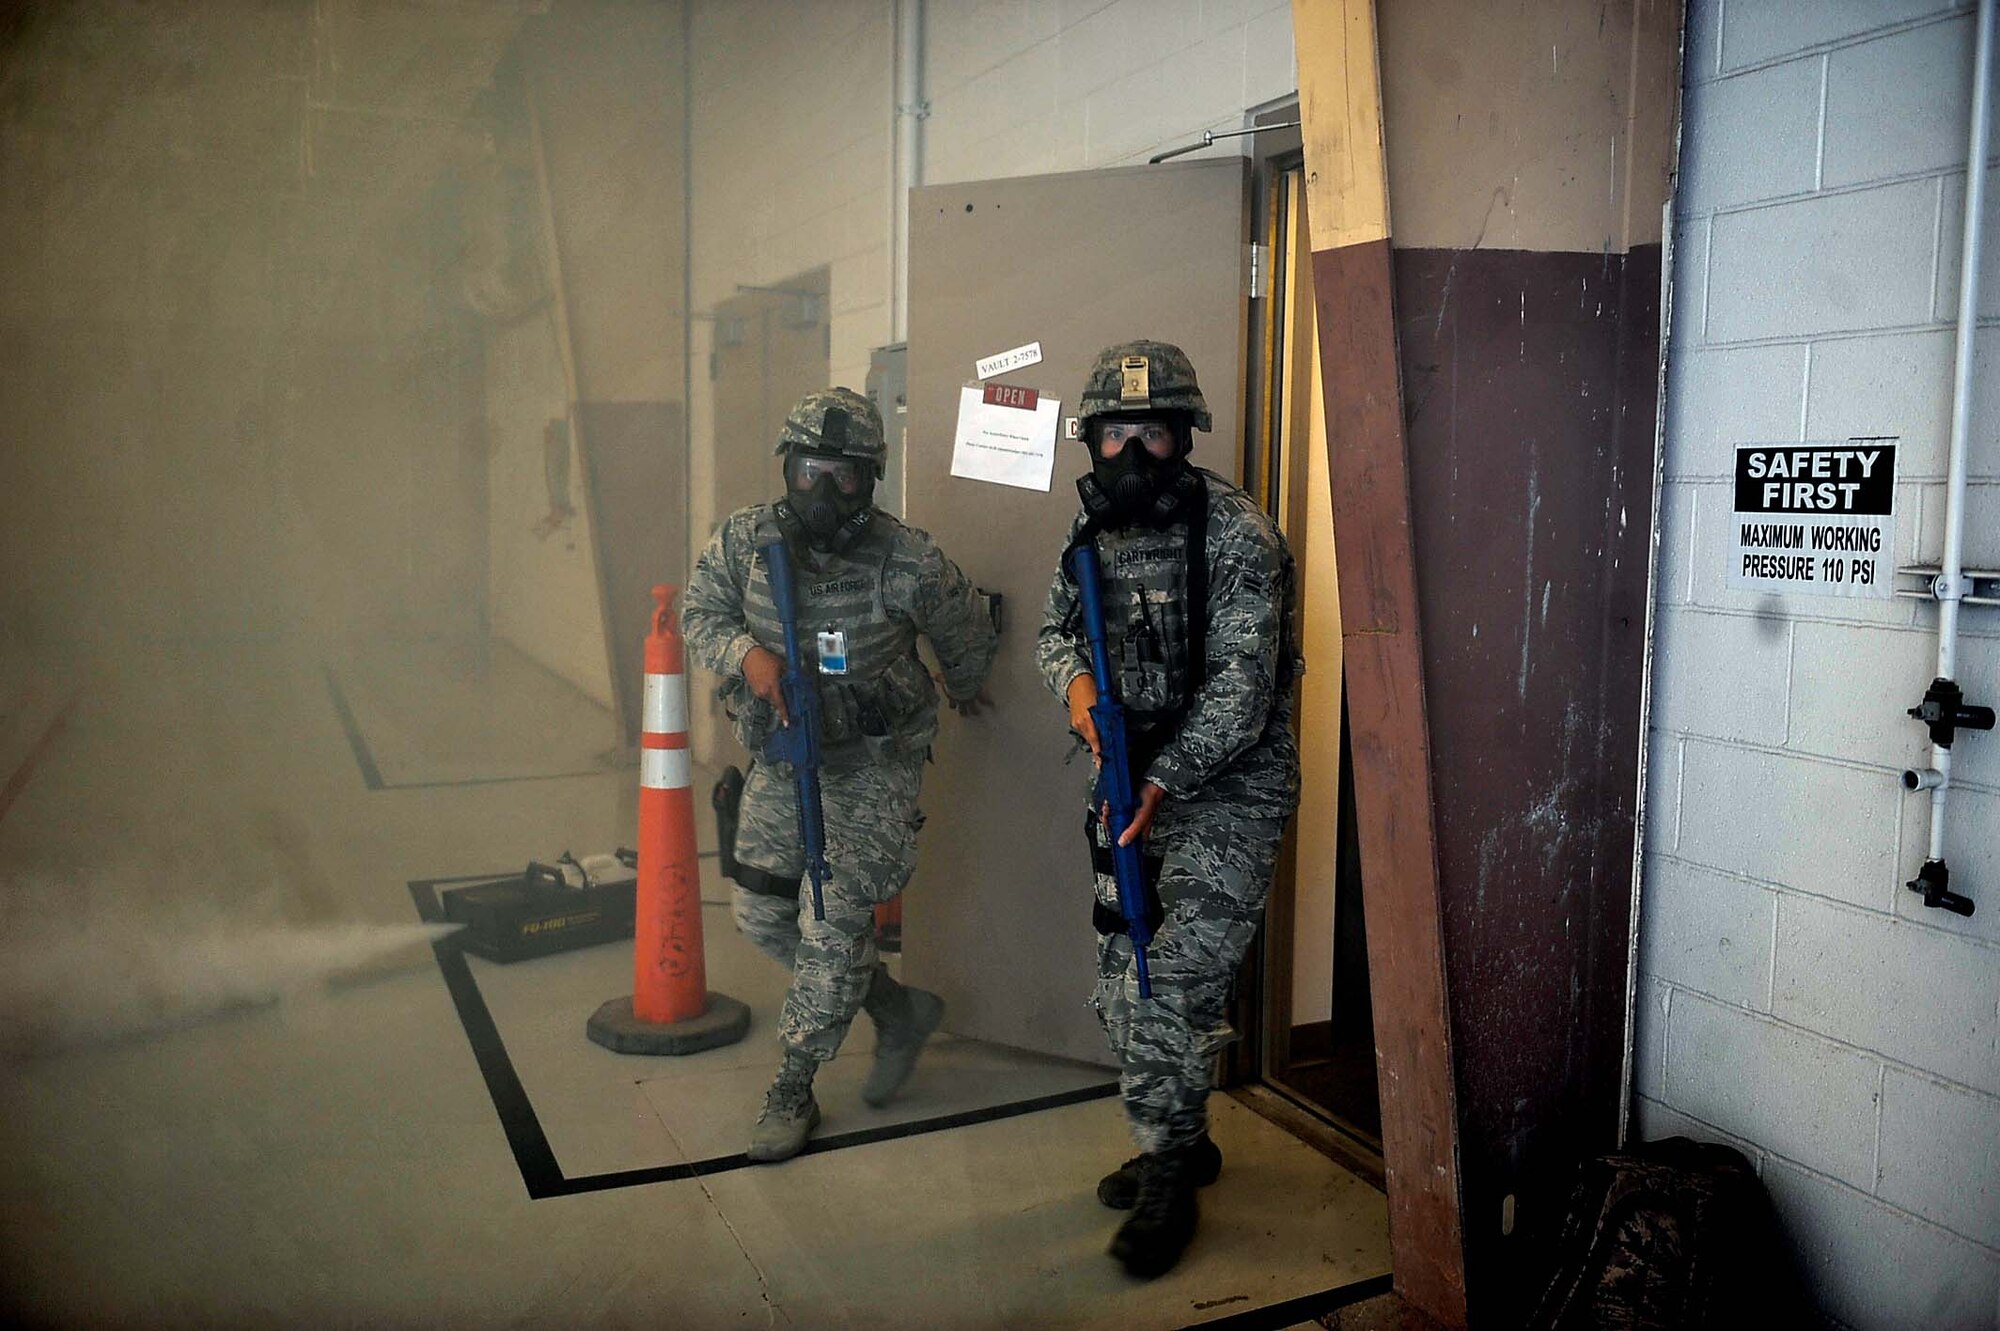 99th Security Forces Squadron Airmen secure hangar 220 after a simulated active shooter scene during a base wide exercise at Nellis Air Force Base, Nev., May 12, 2016. During the scene, simulated active shooters interrupted a mock ceremony with smoke bombs making it increasingly difficult to secure the hangar. (U.S. Air Force photo by Senior Airman Rachel Loftis)